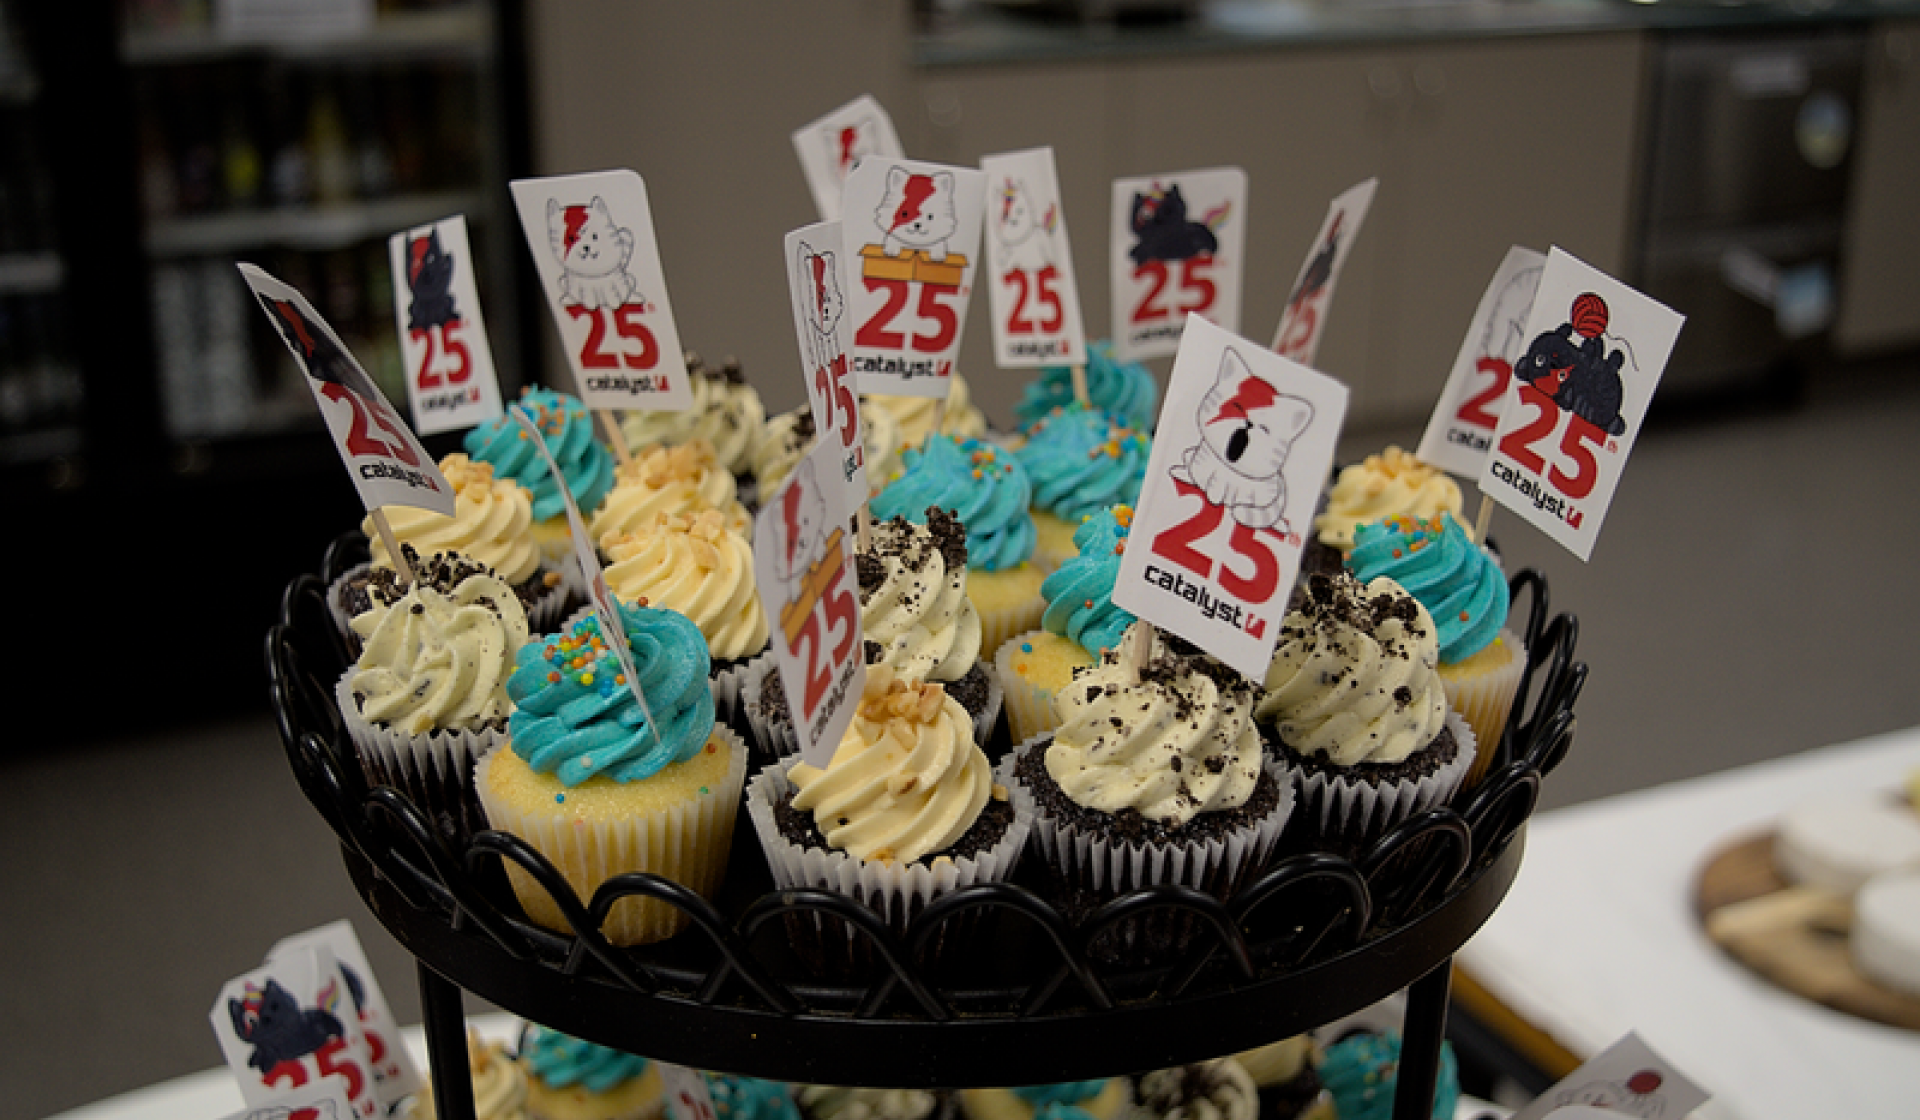 A lot of cupcakes with blue or white icing and sprinkles and flags saying Catalyst 25